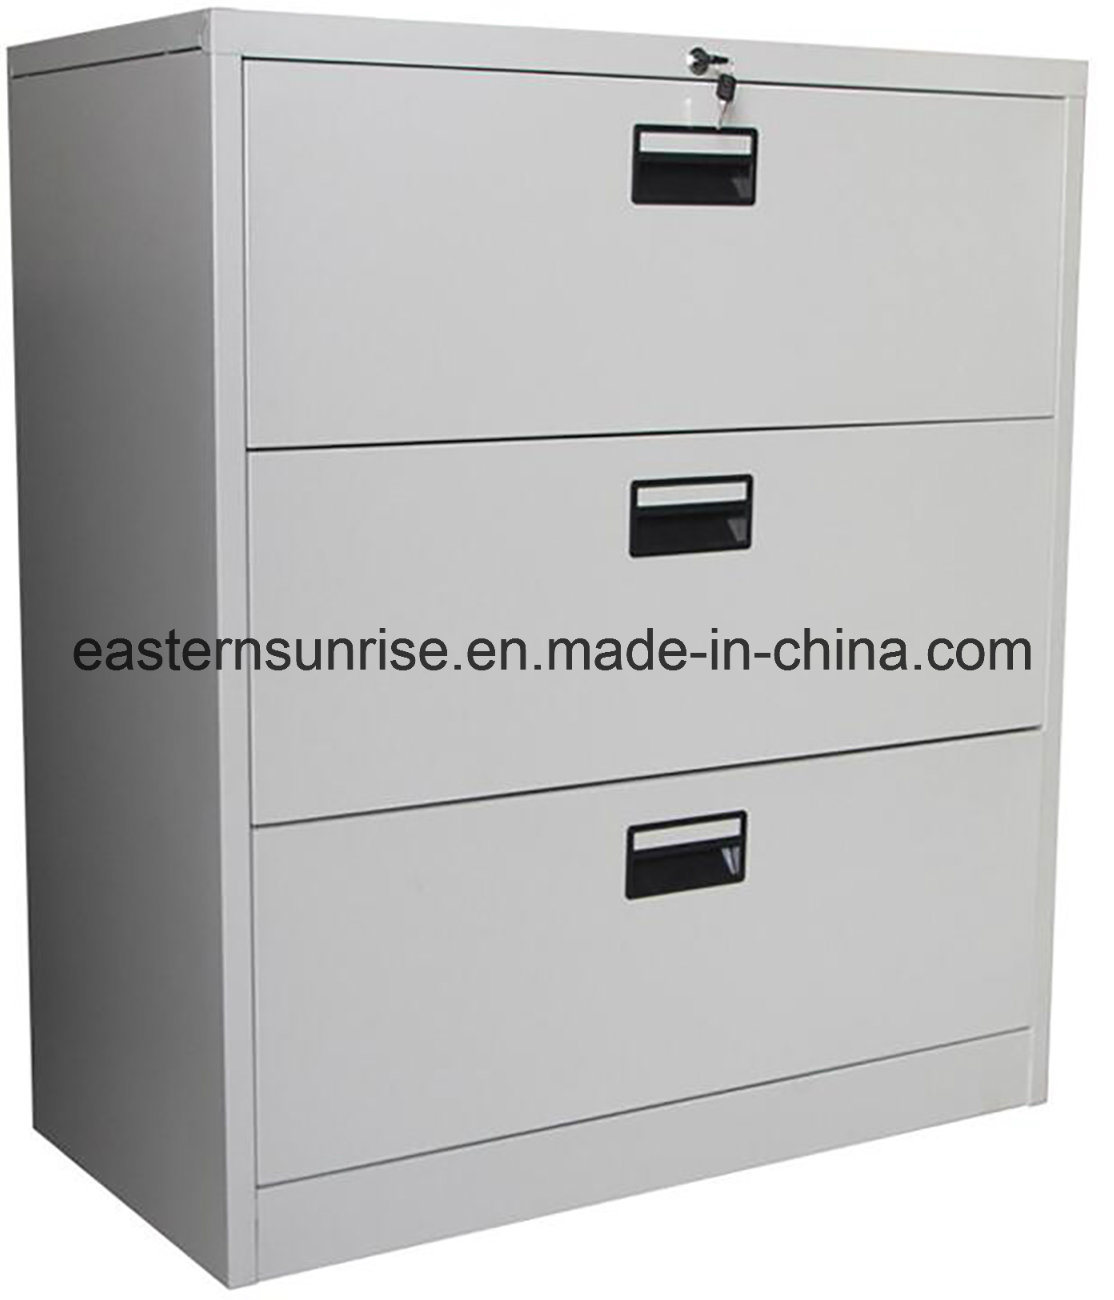 Fireproof Vertical Cabinets, UL Certificated Cabinets, Fire Resistant Steel Cabinet.